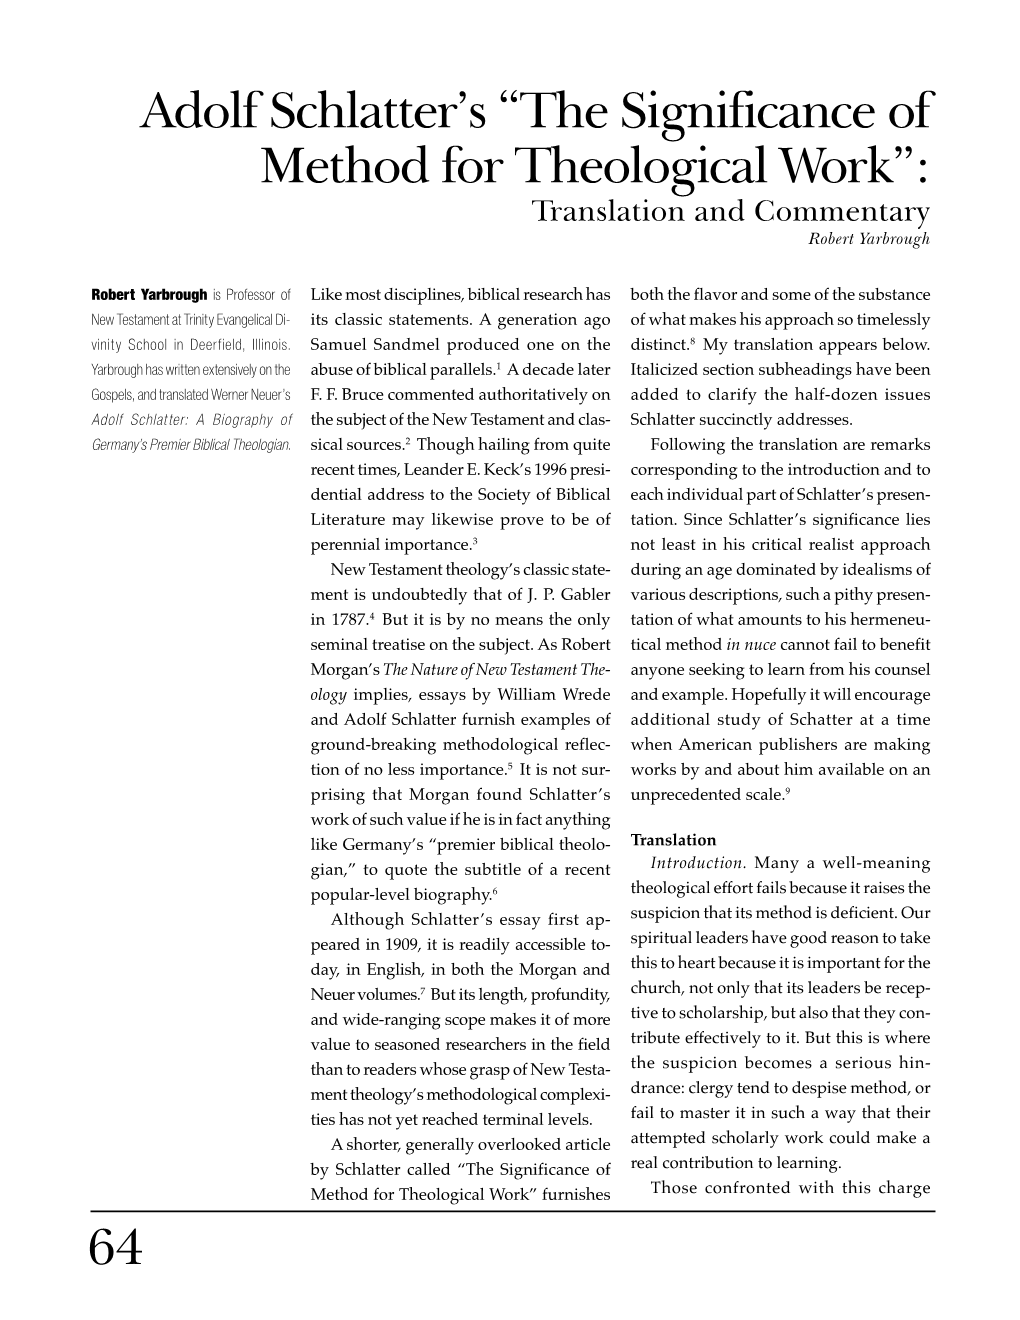 64 Adolf Schlatter's “The Significance of Method for Theological Work”